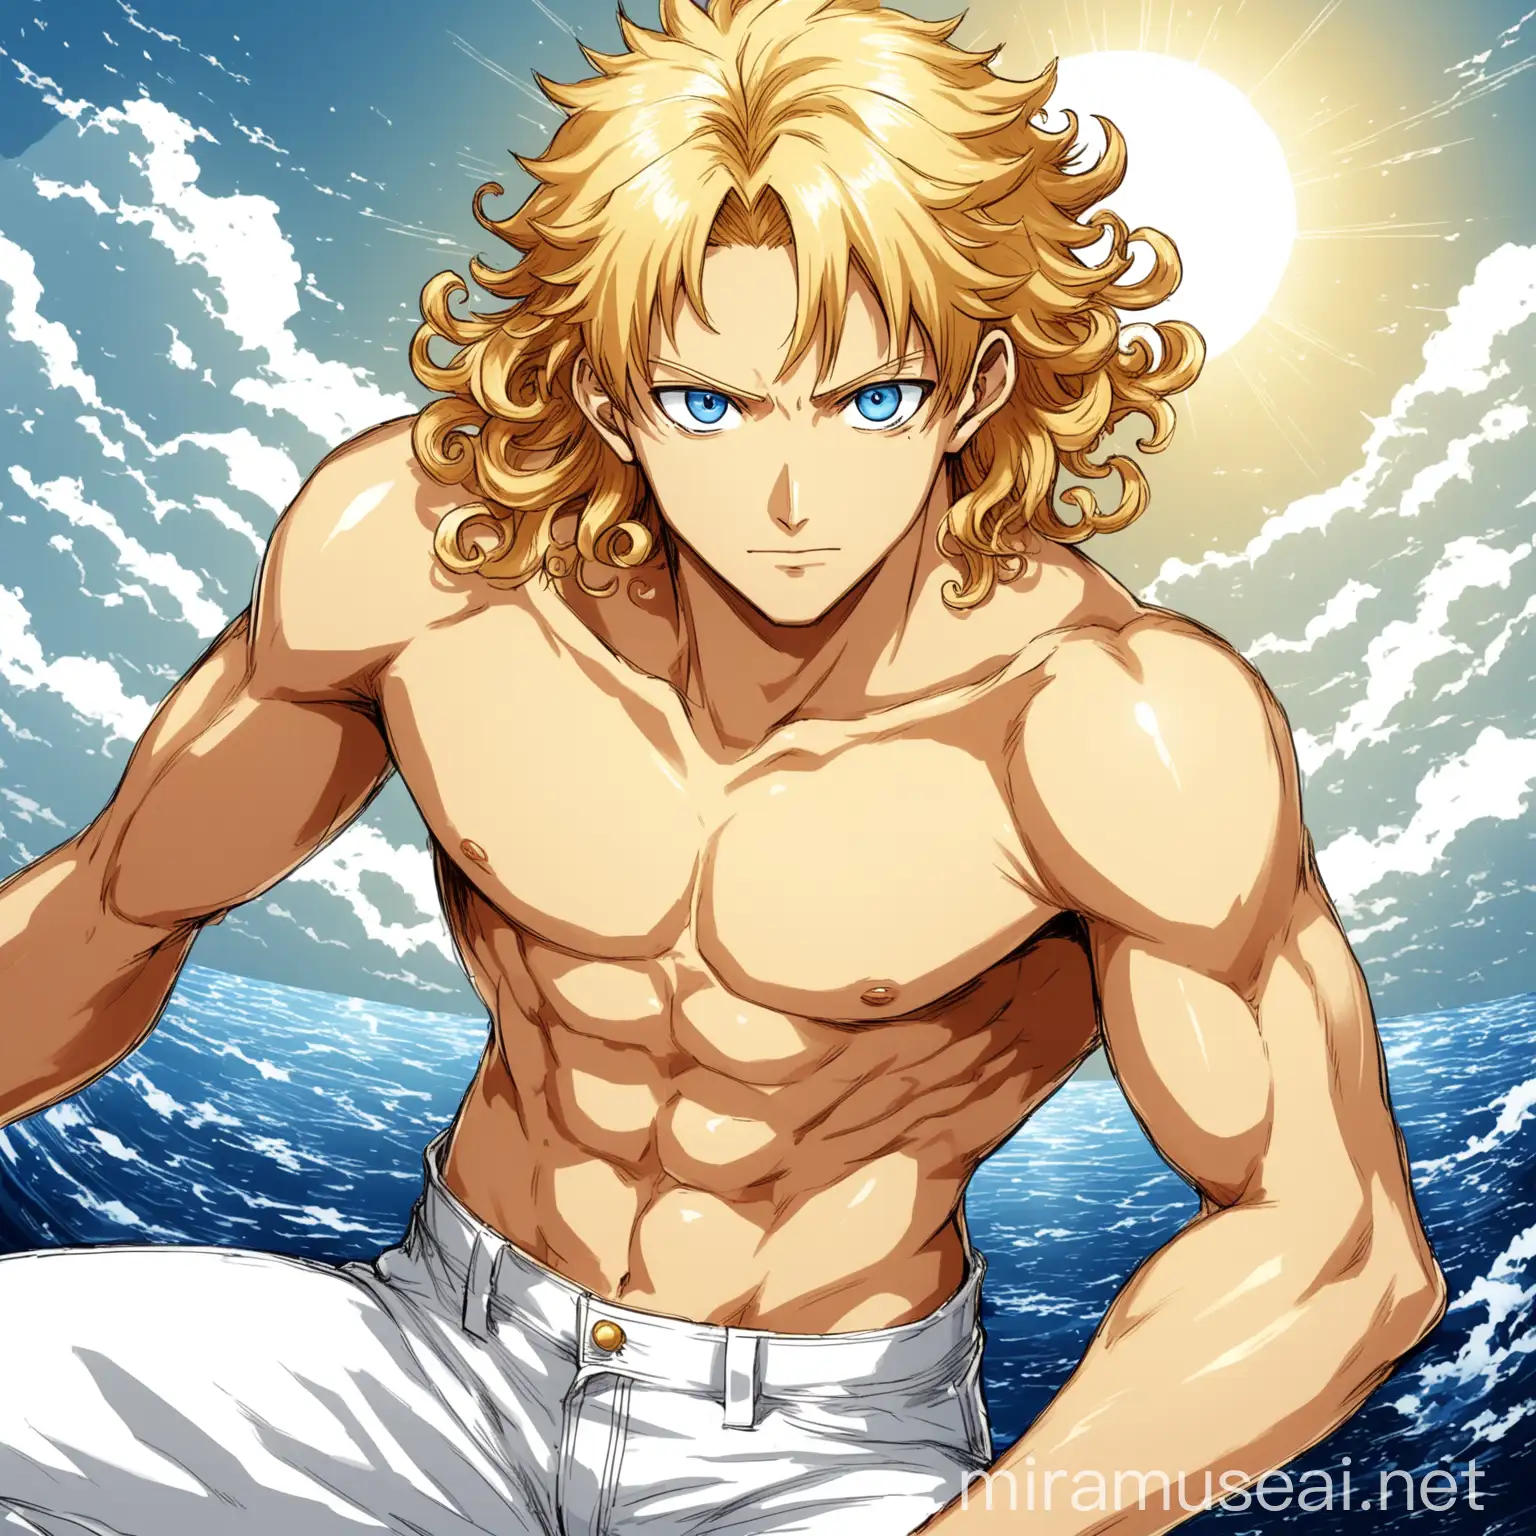 Handsome blonde anime shirtless boy beautiful like the sun, his hairs are curly and attractive, he must be in his twenties, he have blu eyes beautiful and deep like ocean. He have white pants. he a cute bishounen face with masculine traits. Draw in One Piece by Eichiro Oda artstyle. like said he has masculine facial features but which also have the sweetness of feminime. Draw his entire body. maintain correct anatomy of the body and eyes, he is a marine from one piece. Change from usual generated type of face